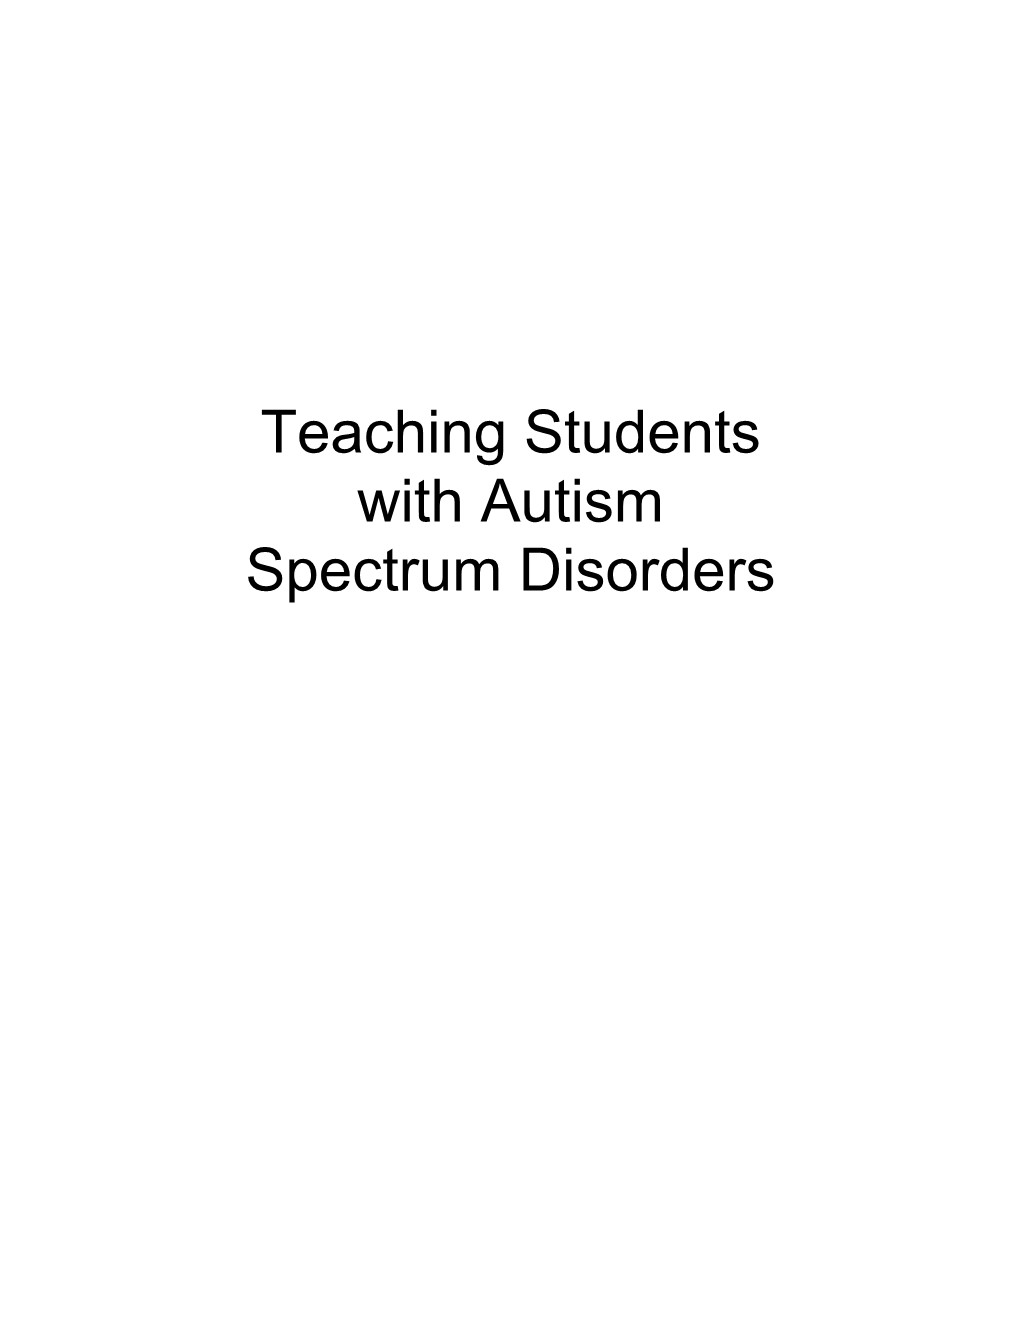 Teaching Students with Autism Spectrum Disorders ALBERTA LEARNING CATALOGUING in PUBLICATION